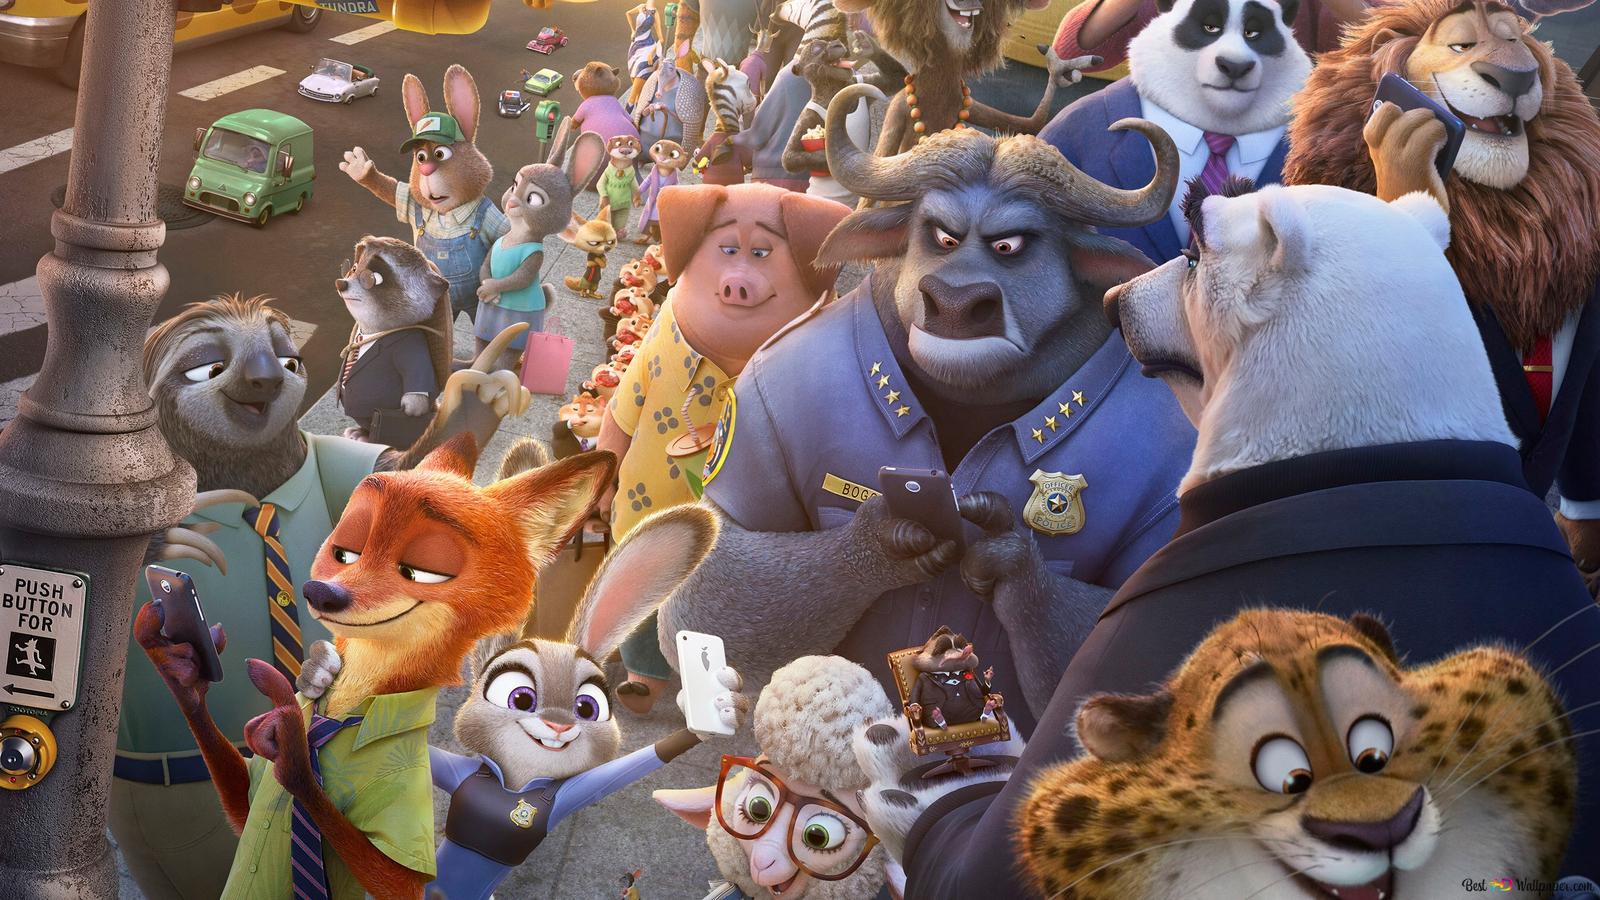 Zootopia 2 - Here's Everything You Need To Know